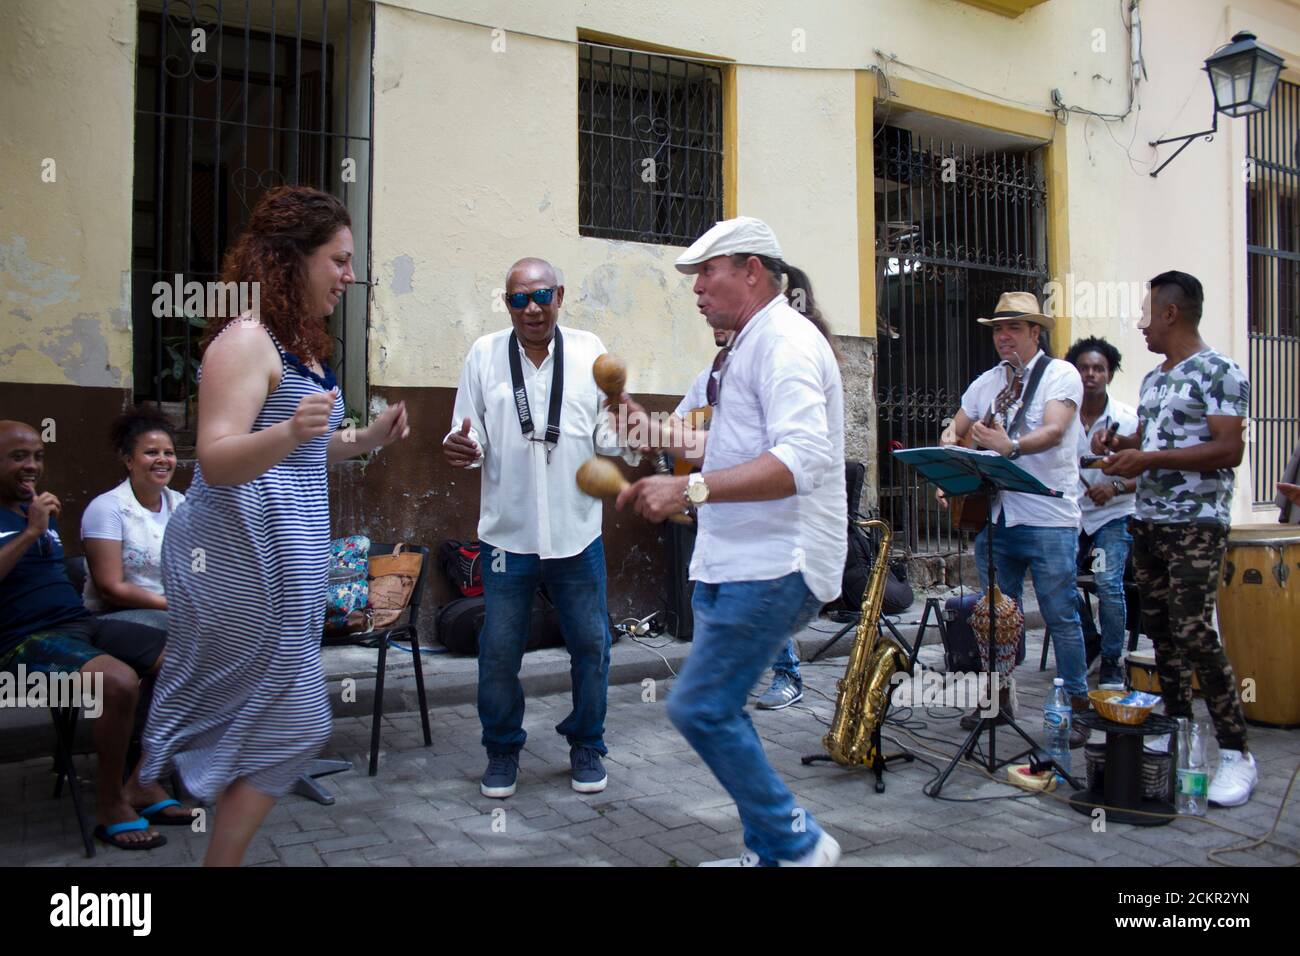 Havana band playing salsa at a lunchtime restaurant, and getting tourists involved Stock Photo